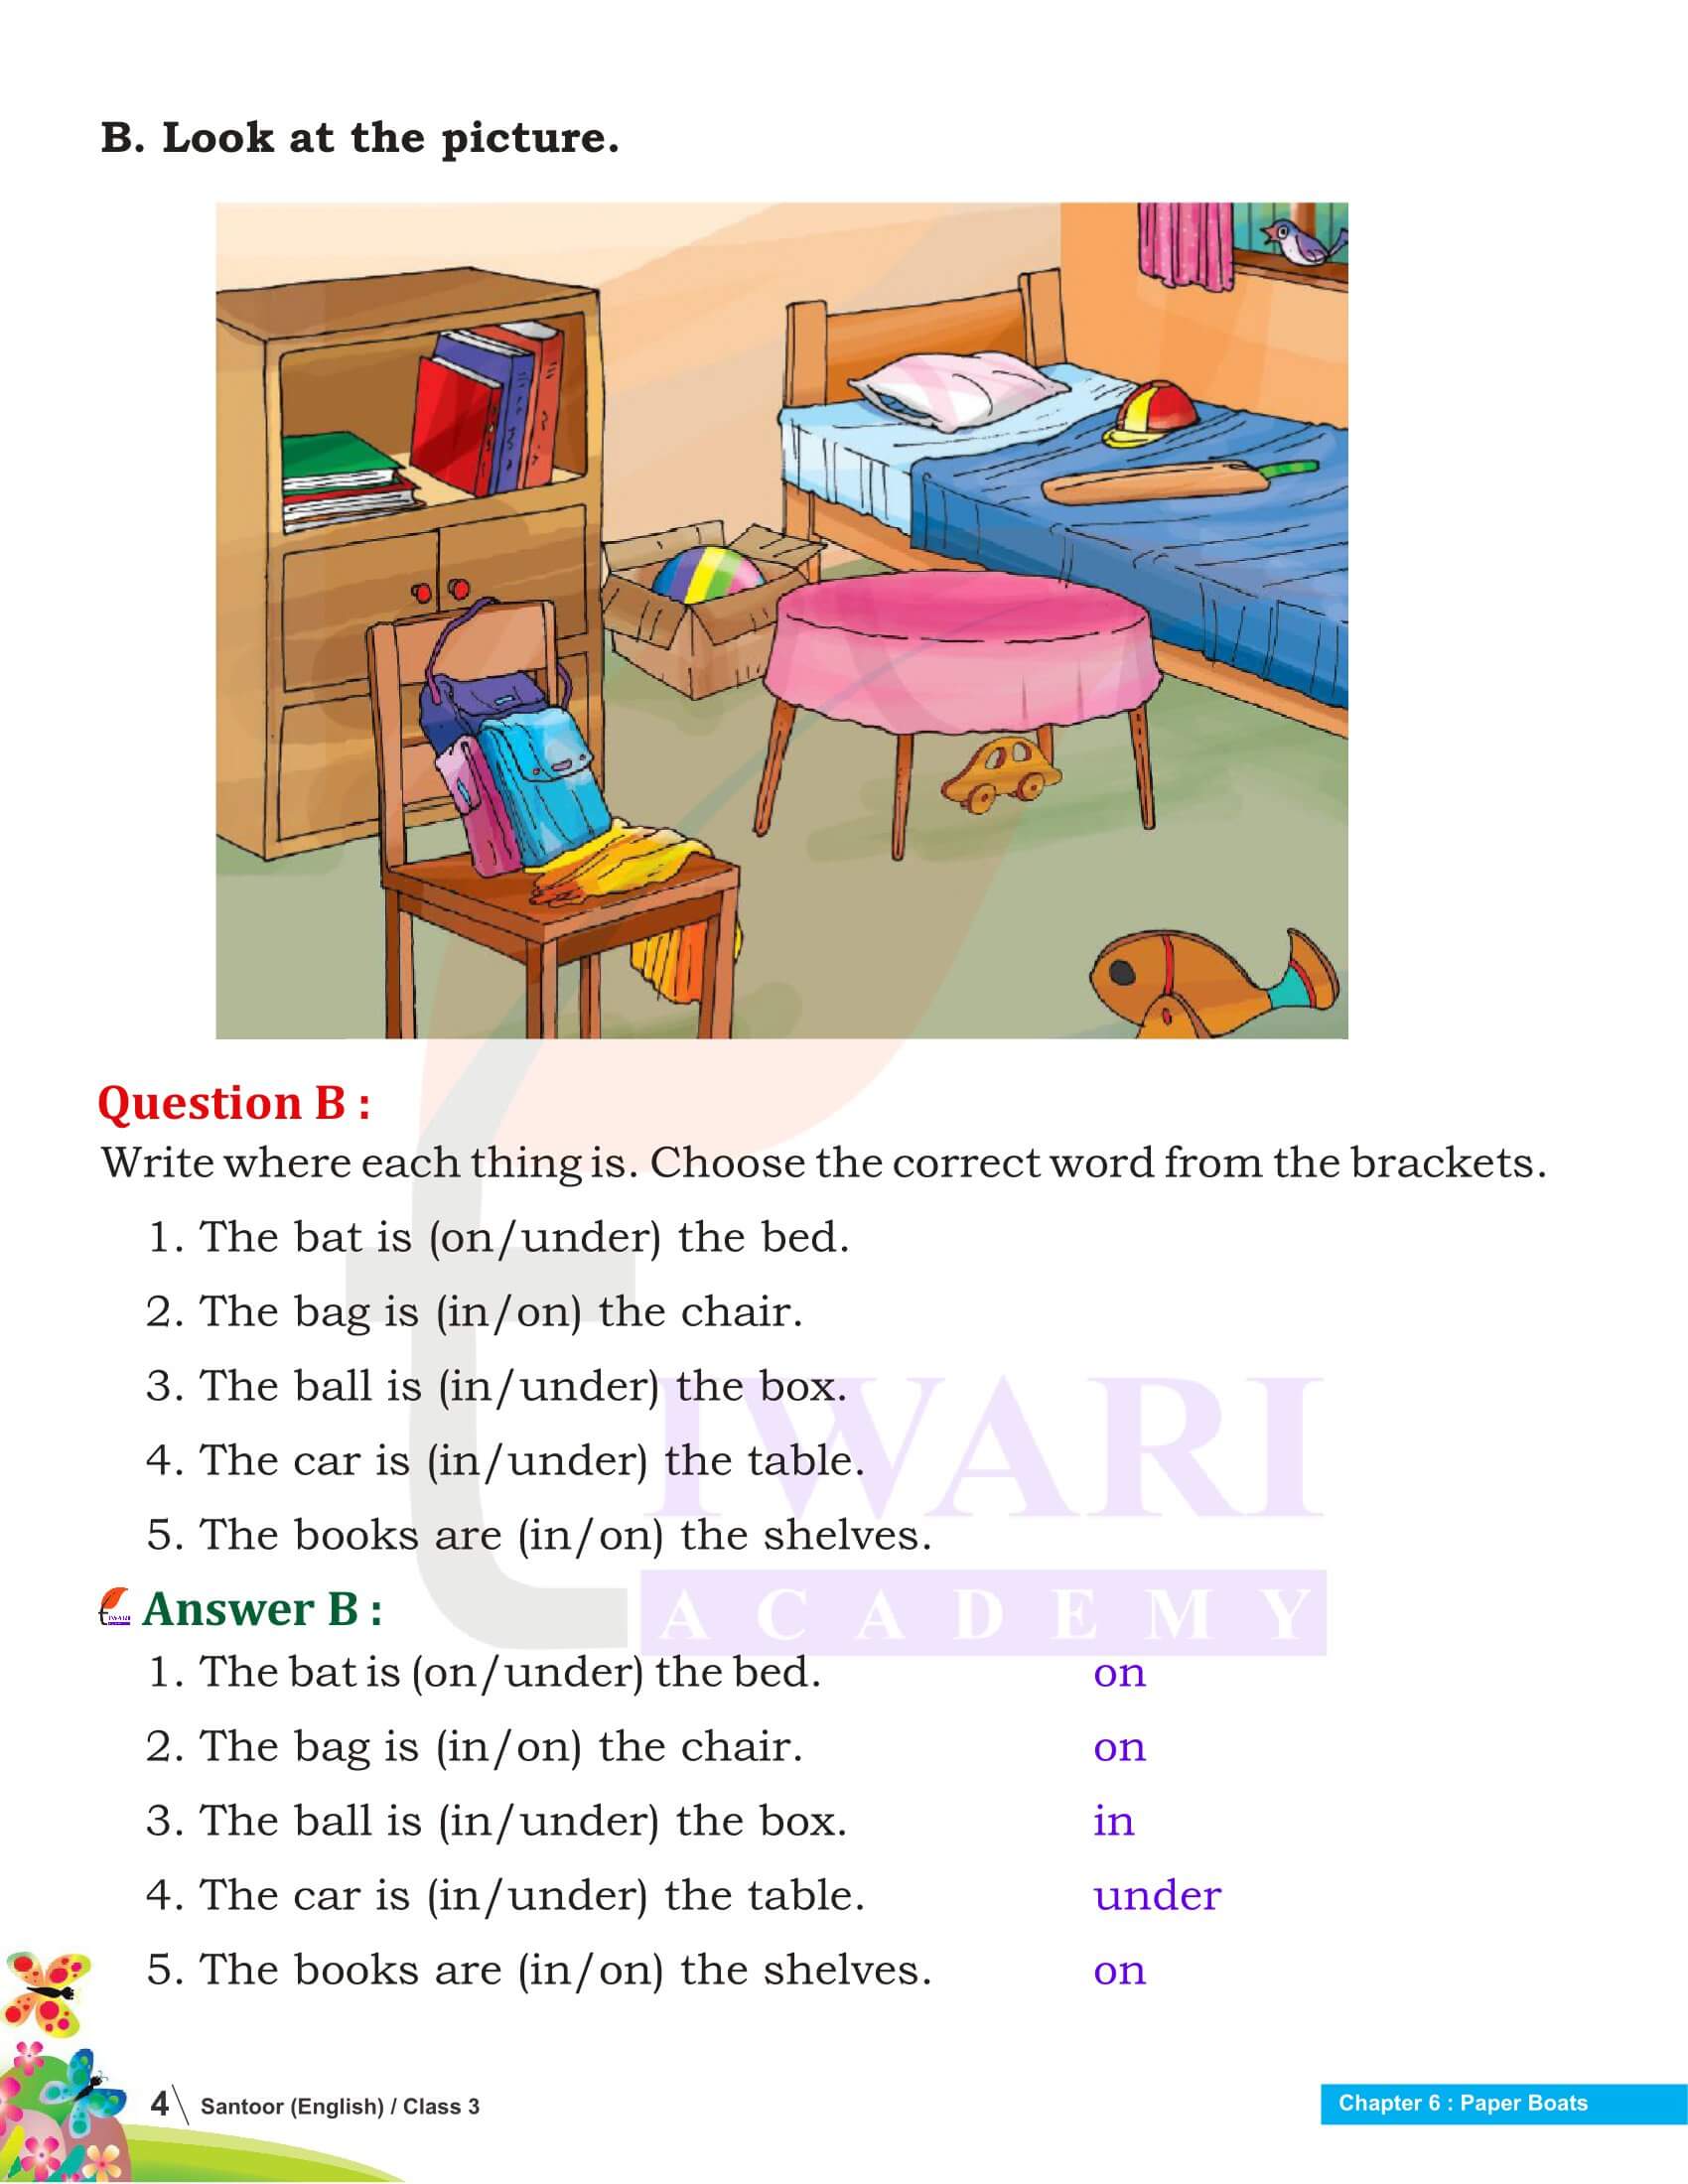 NCERT Solutions for Class 3 English Santoor Chapter 6